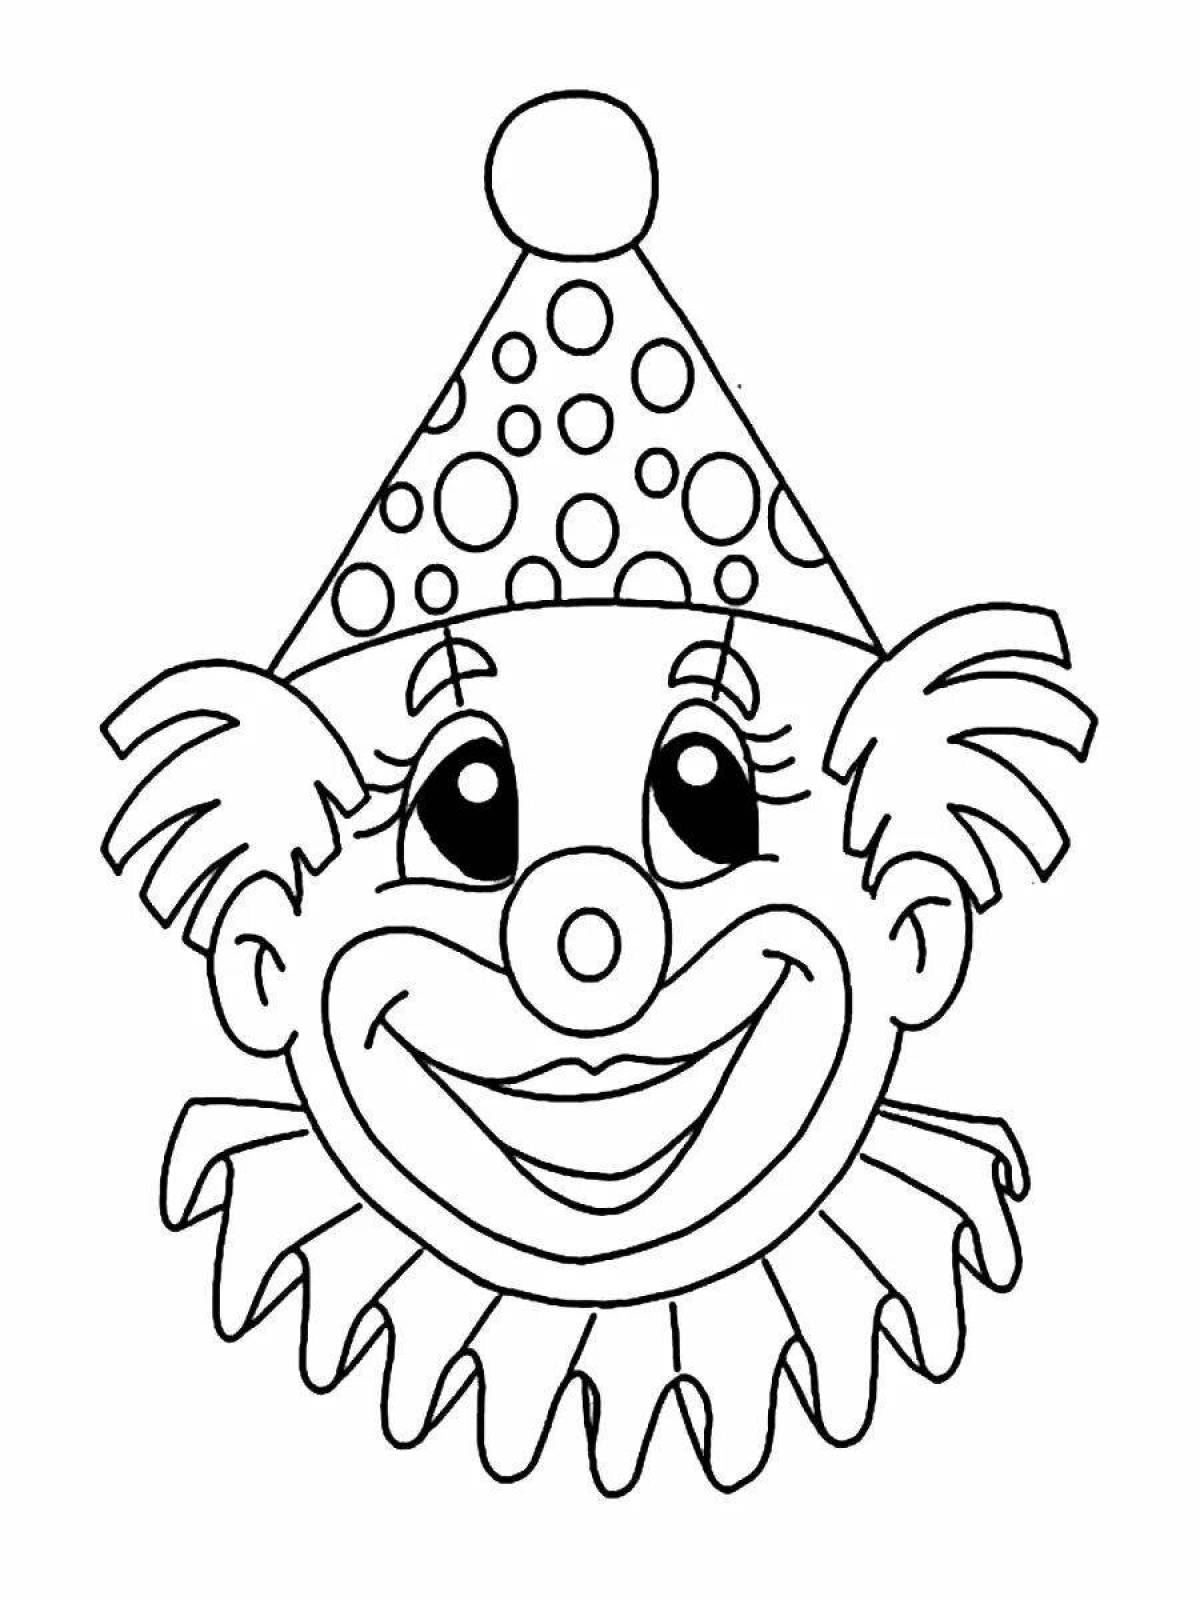 Bright clown coloring book for kids